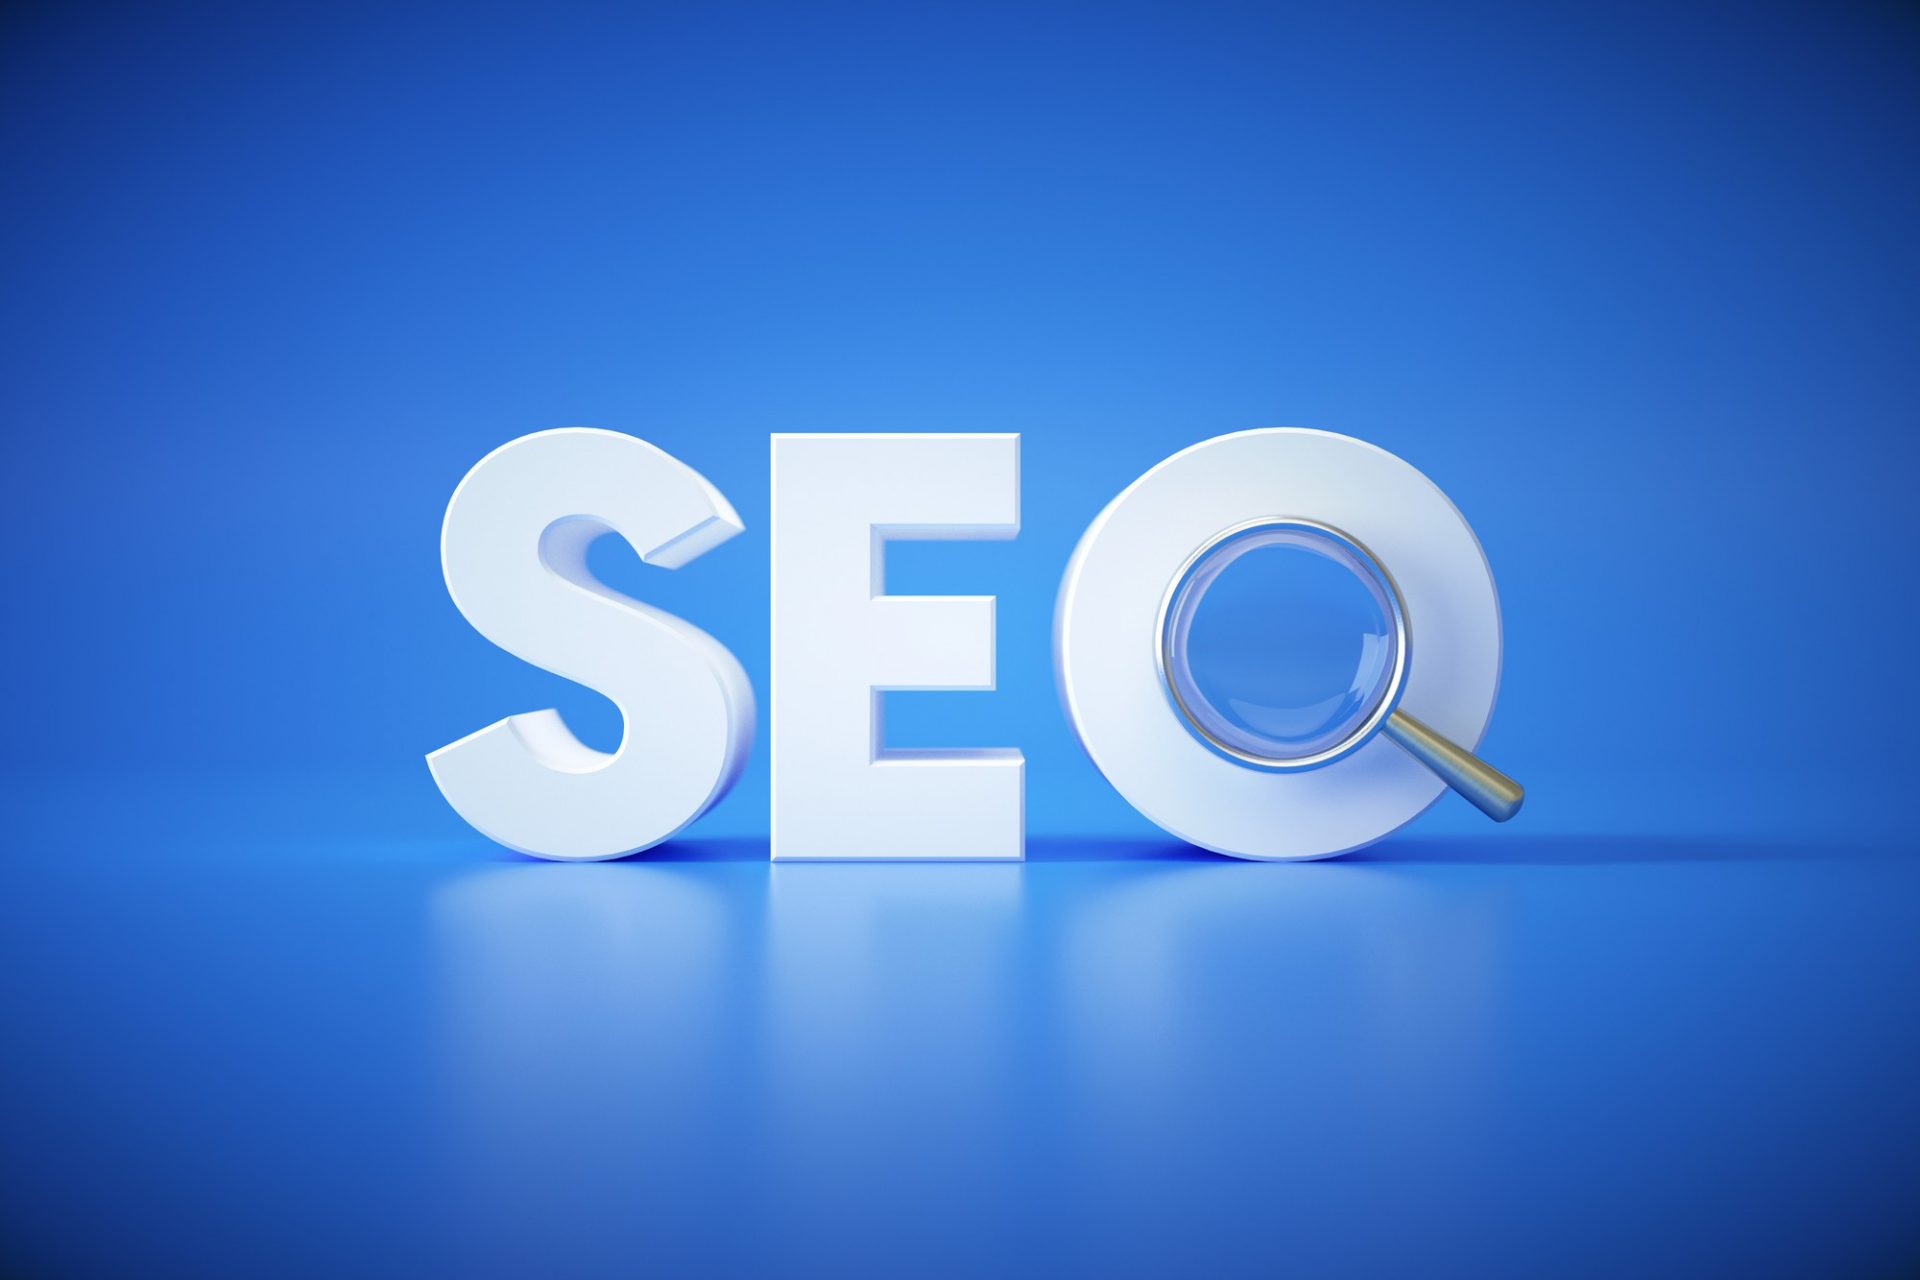 Why Do Schools Need to Care About SEO? - Technology - Lorelei Web